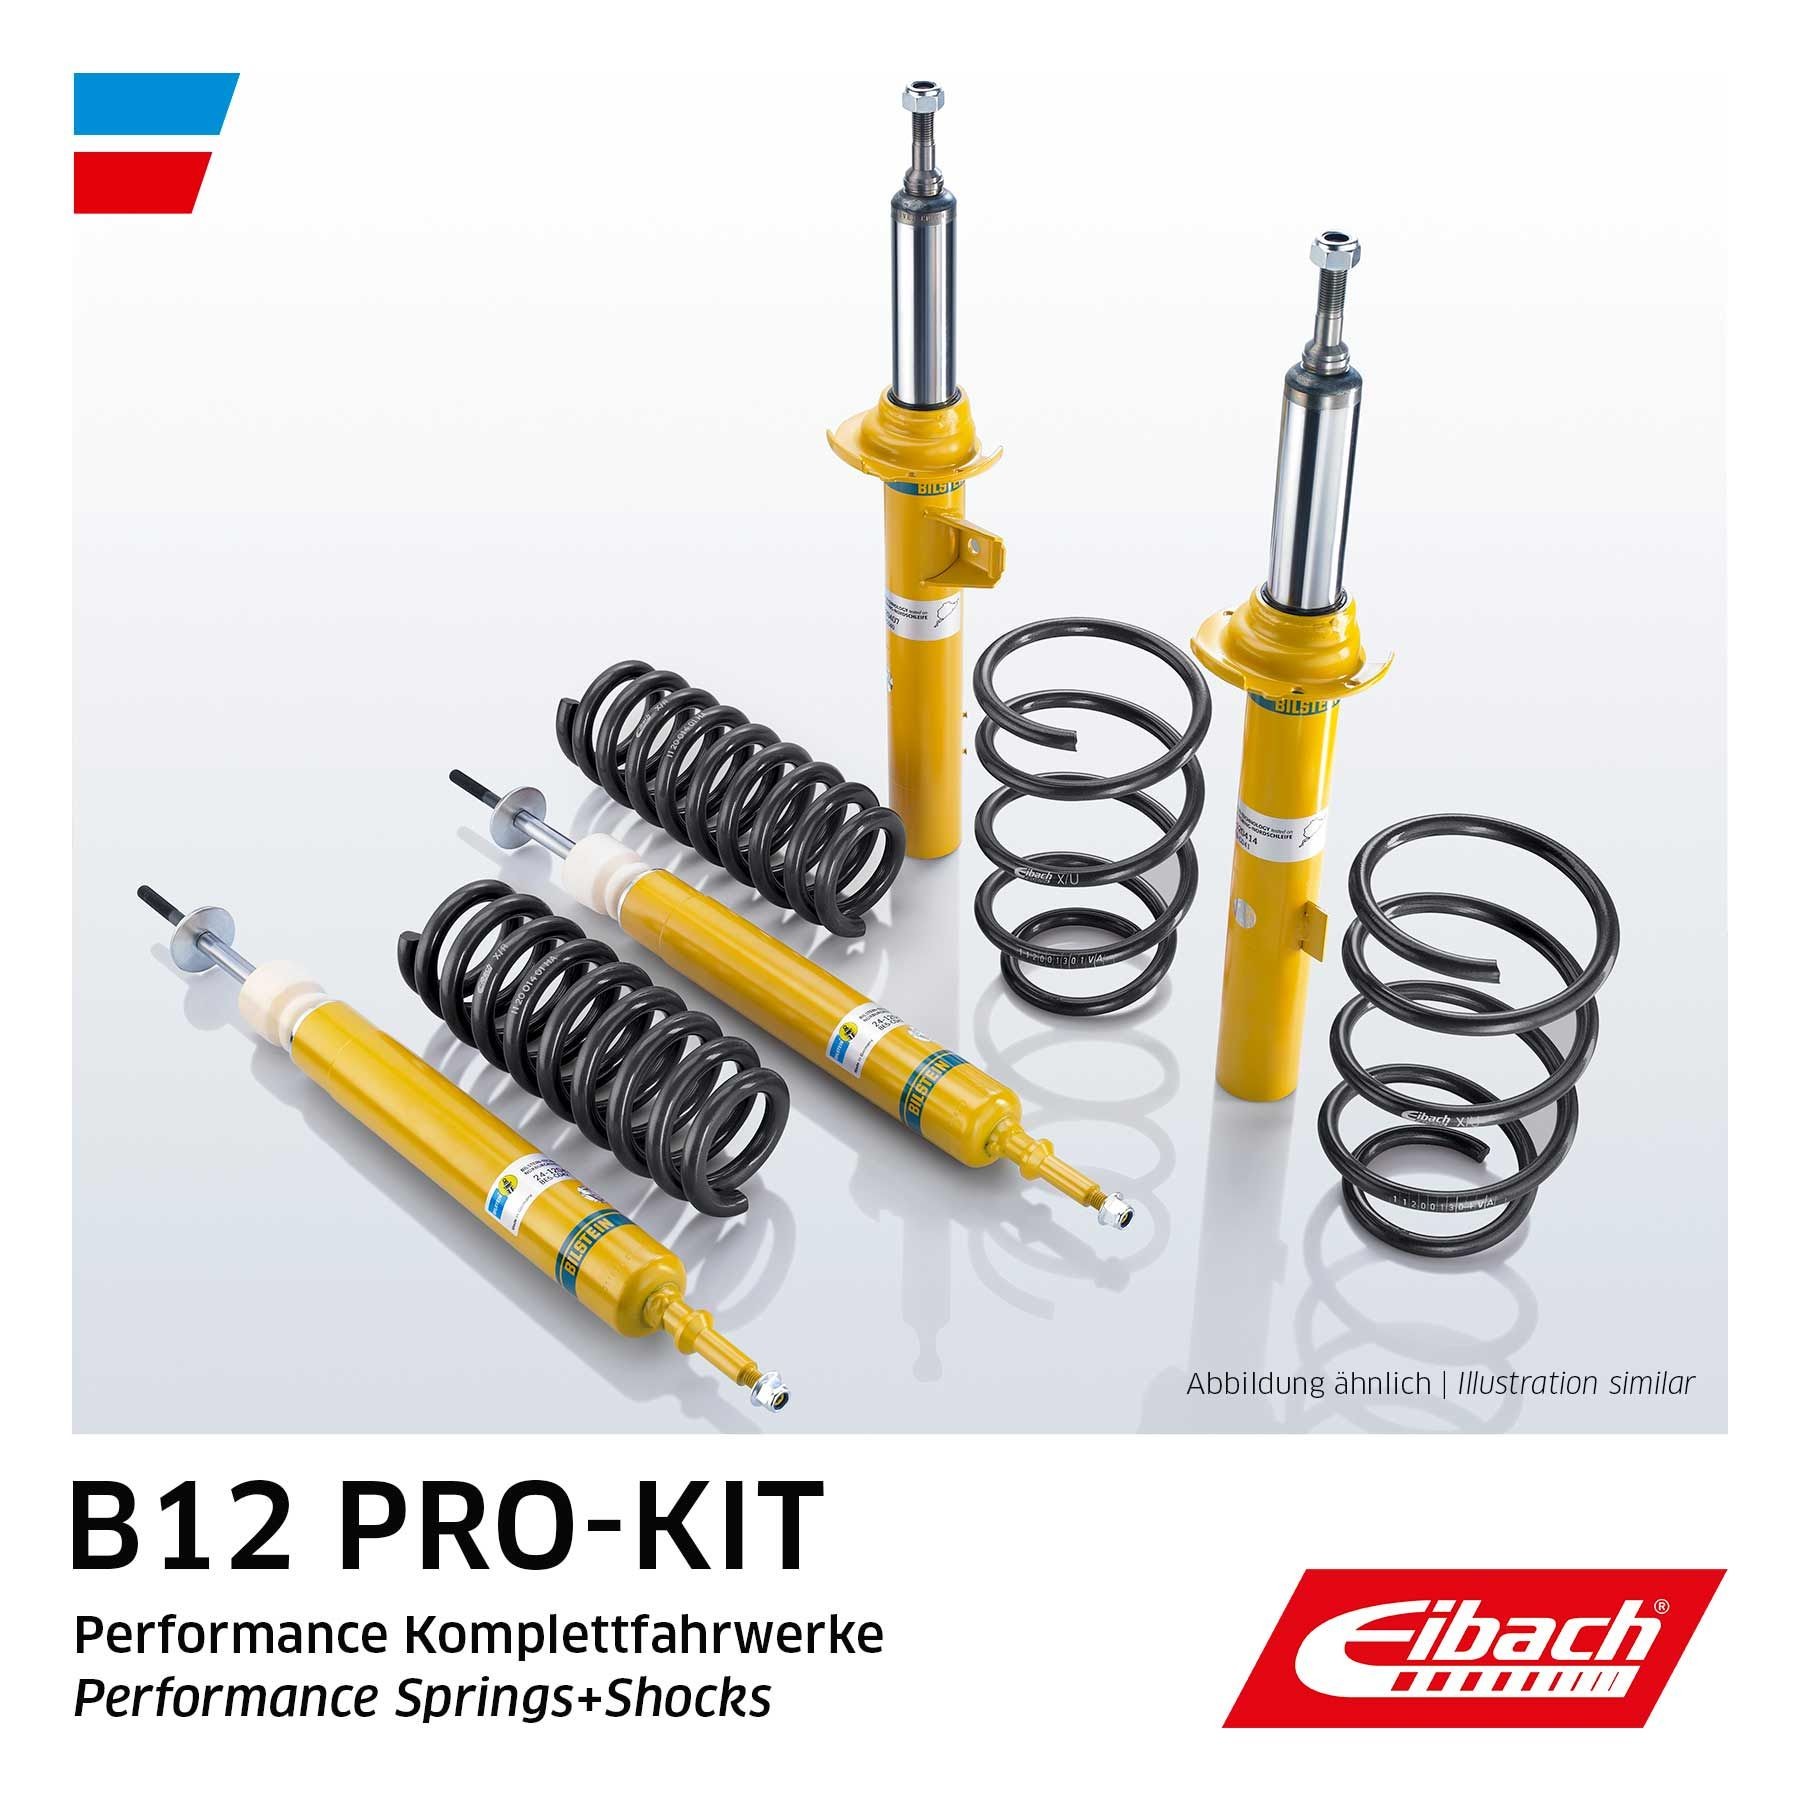 EIBACH Suspension kit, coil springs / shock absorbers VW GOLF I (17) new E90-15-021-02-22